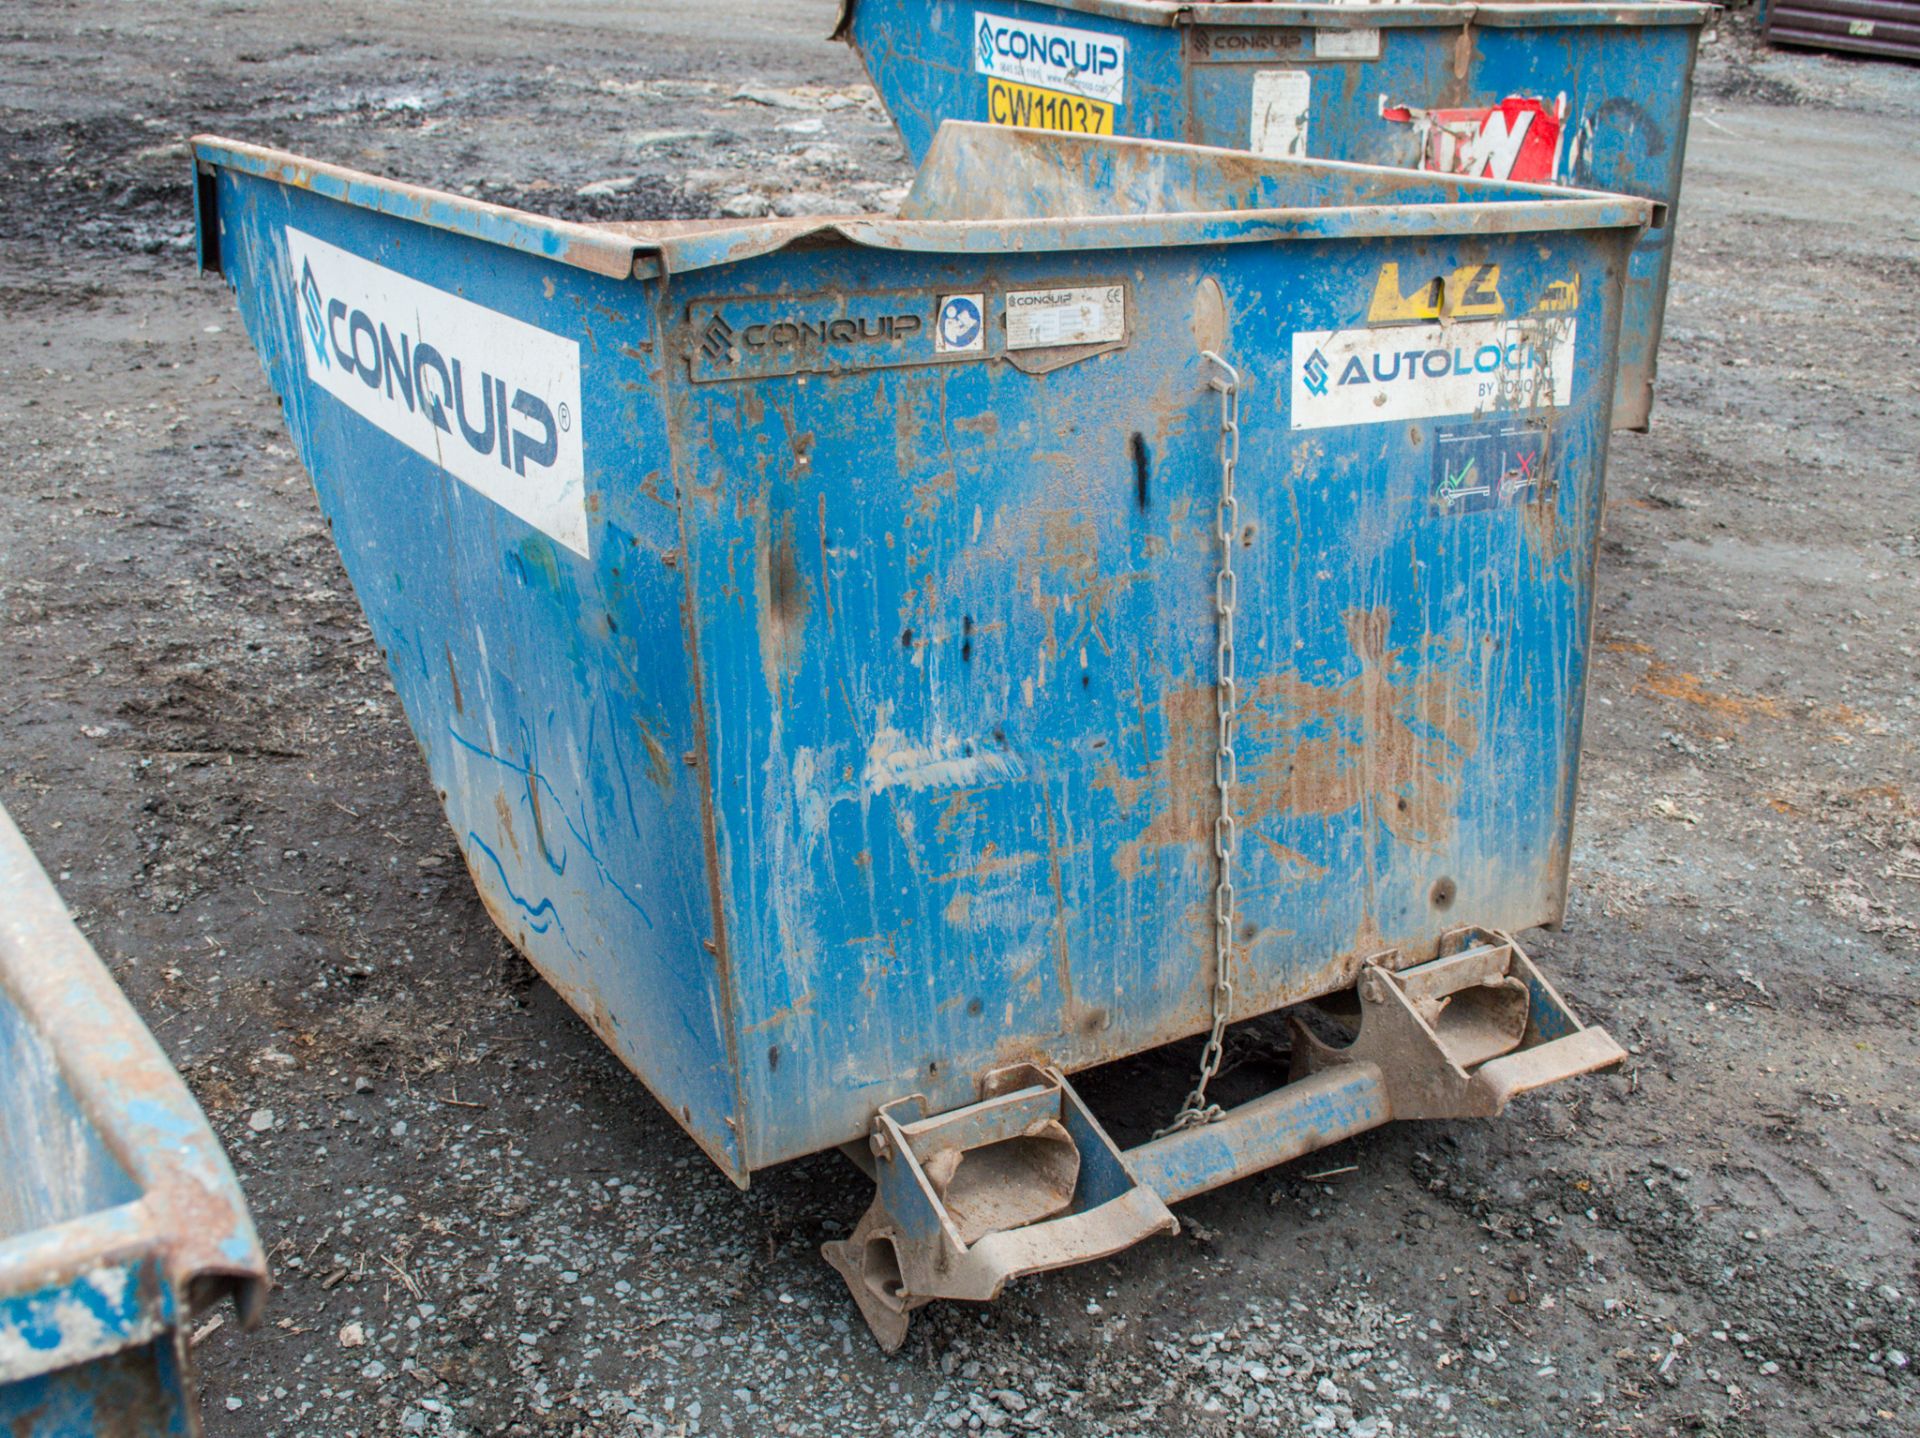 Conquip autolock fork lift tipping skip 87868 - Image 2 of 2